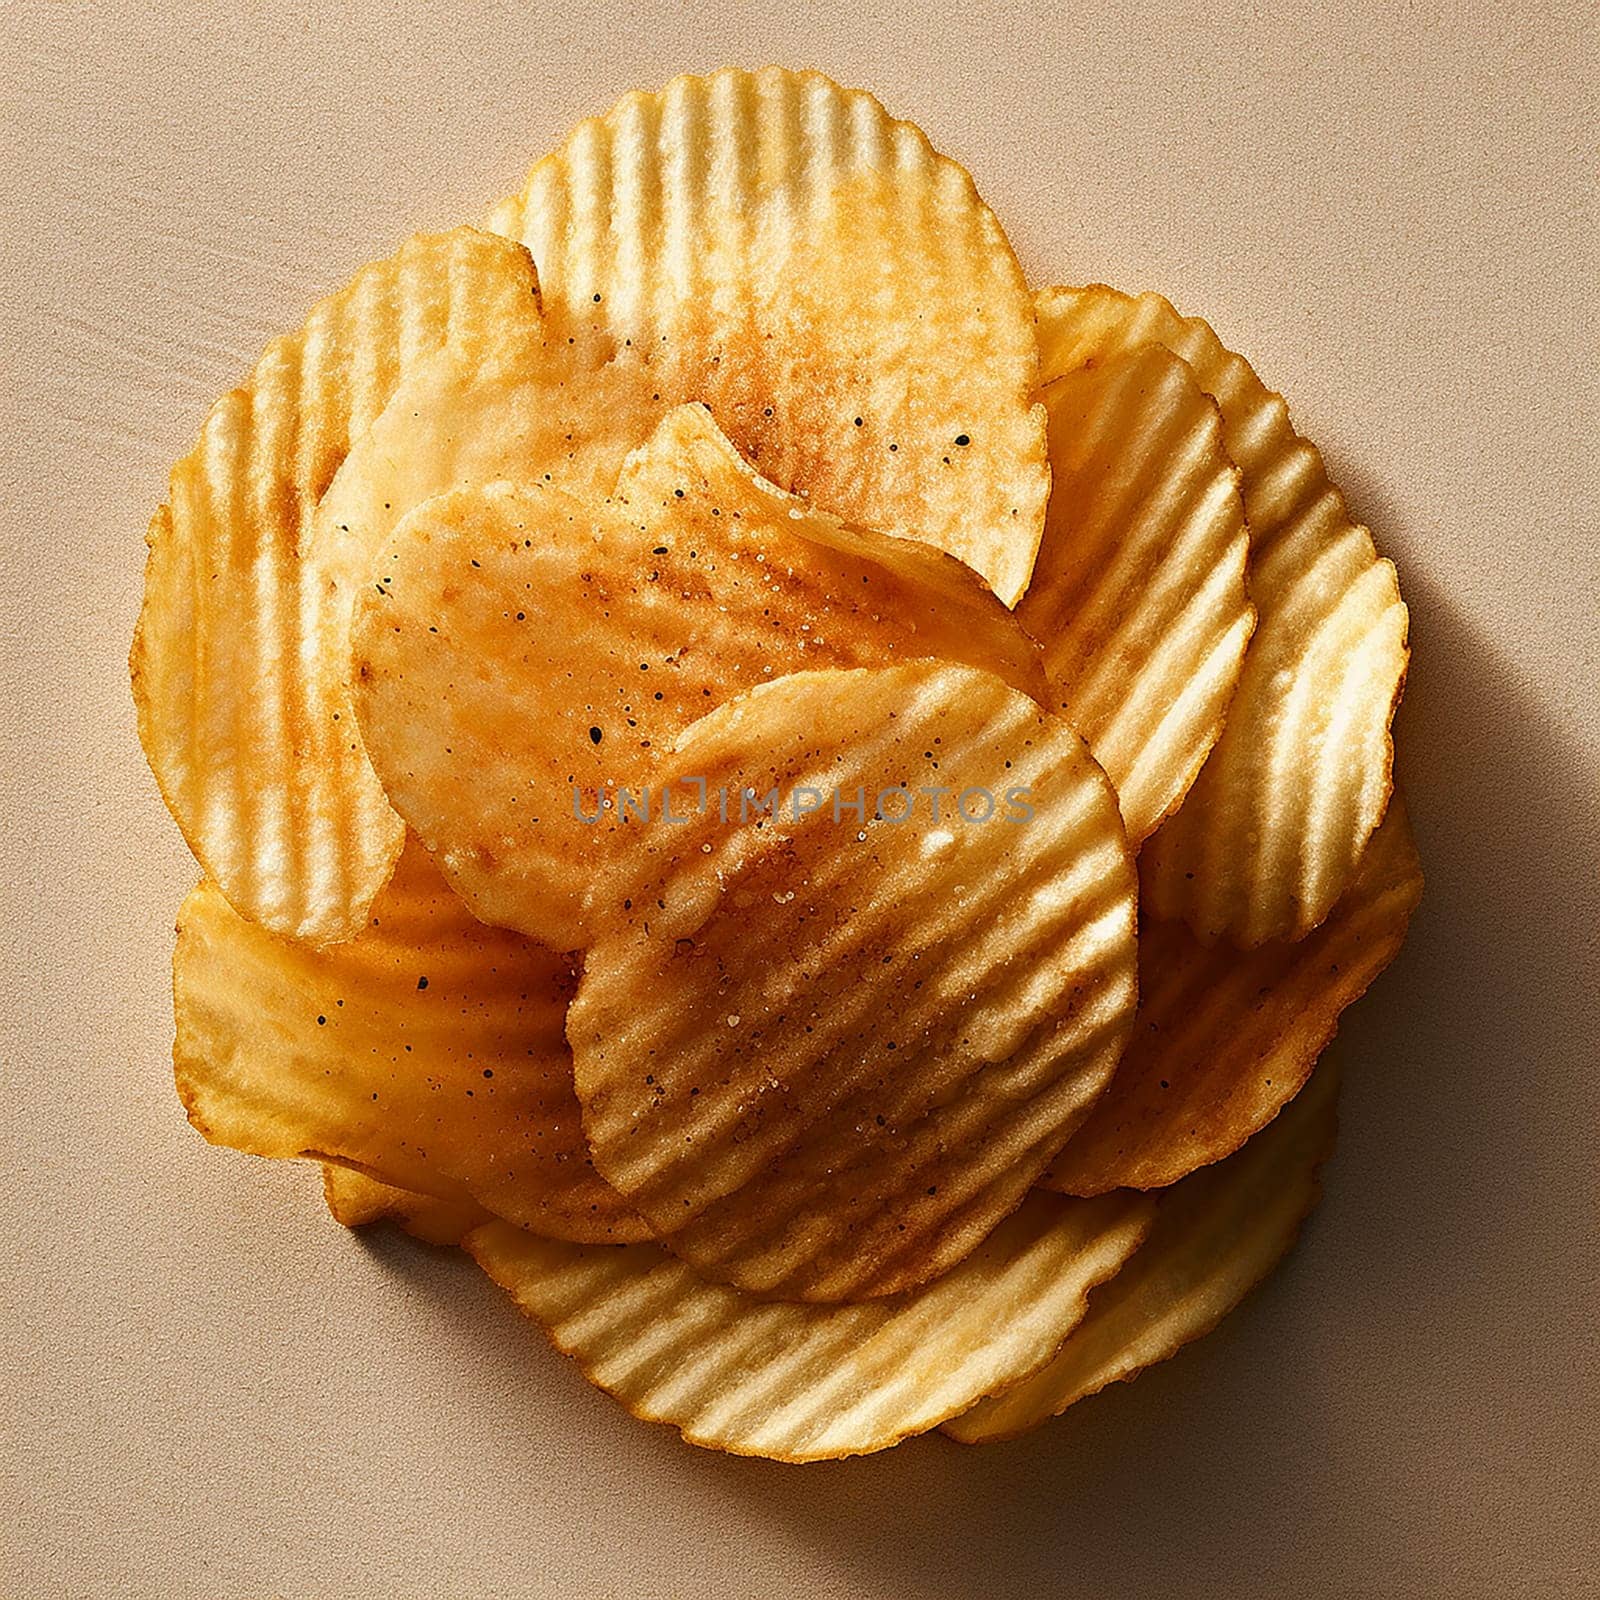 A pile of various crispy potato chips with salt, on upper view